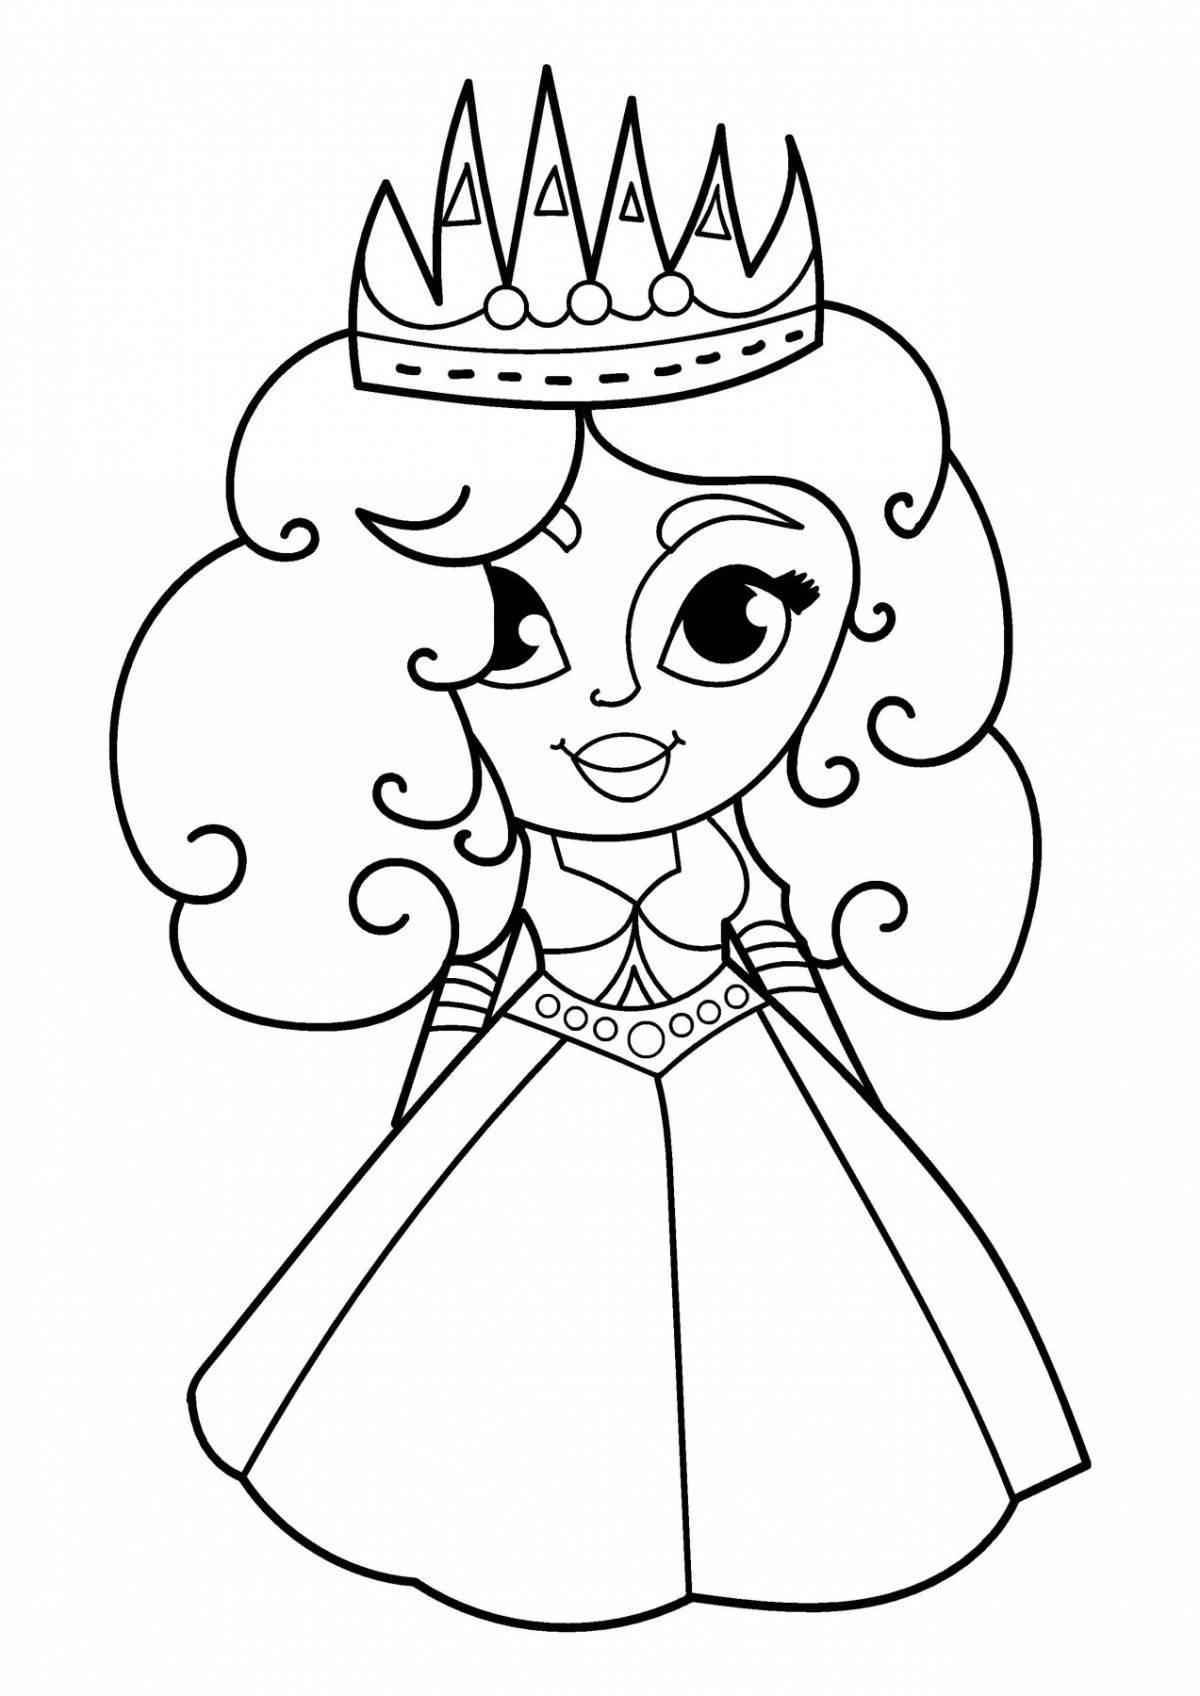 Cute princess coloring pages for girls 4-5 years old